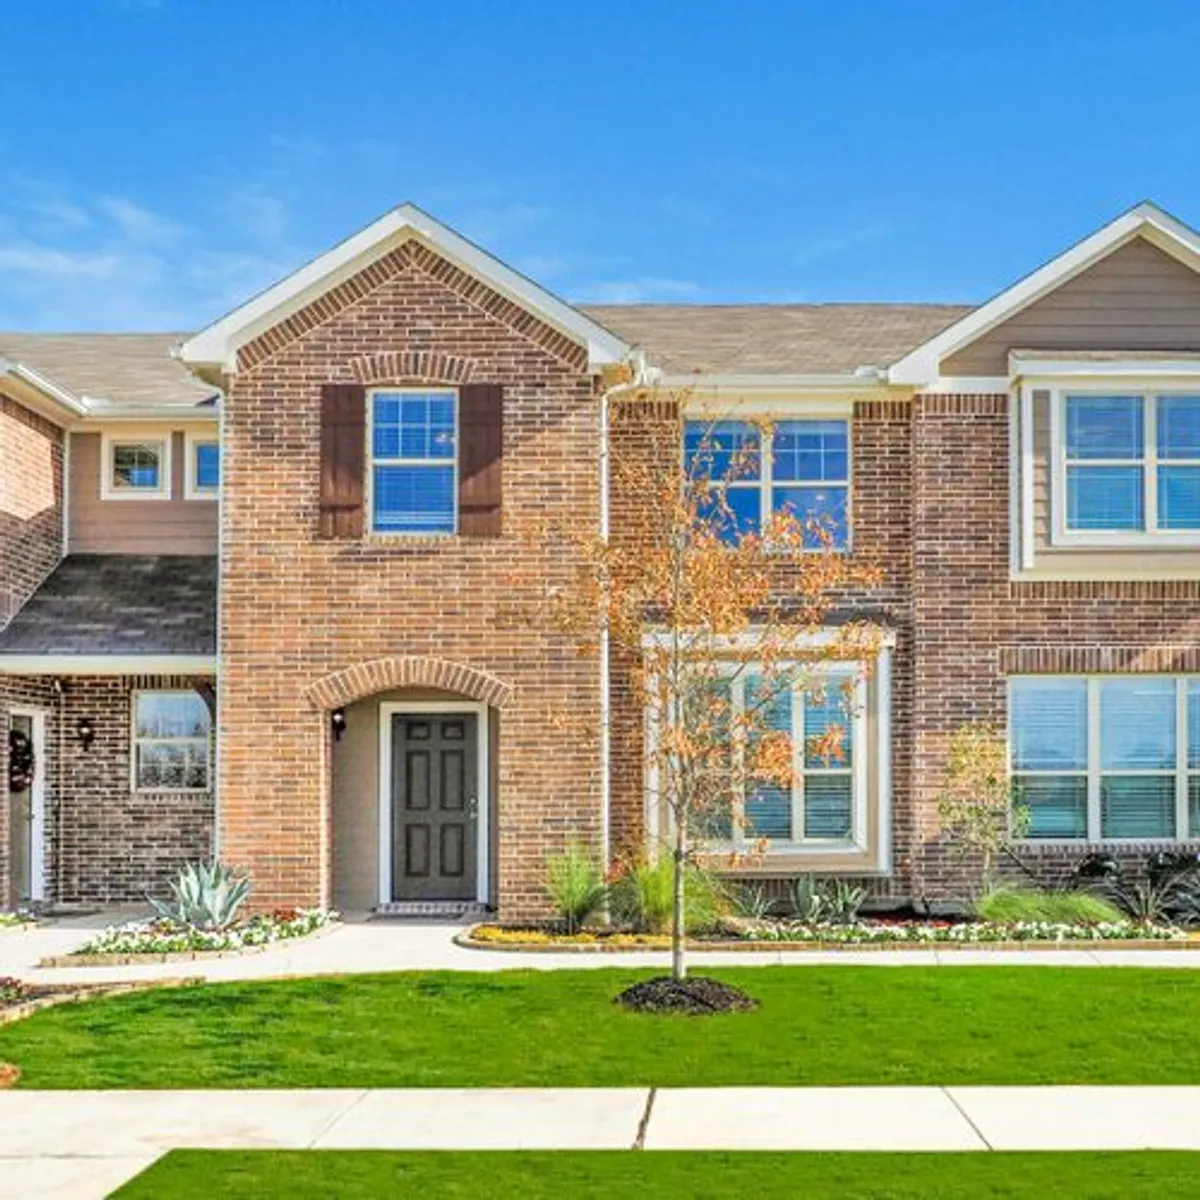 Featured Community: Meet Brentwood Place Townhomes in Denton